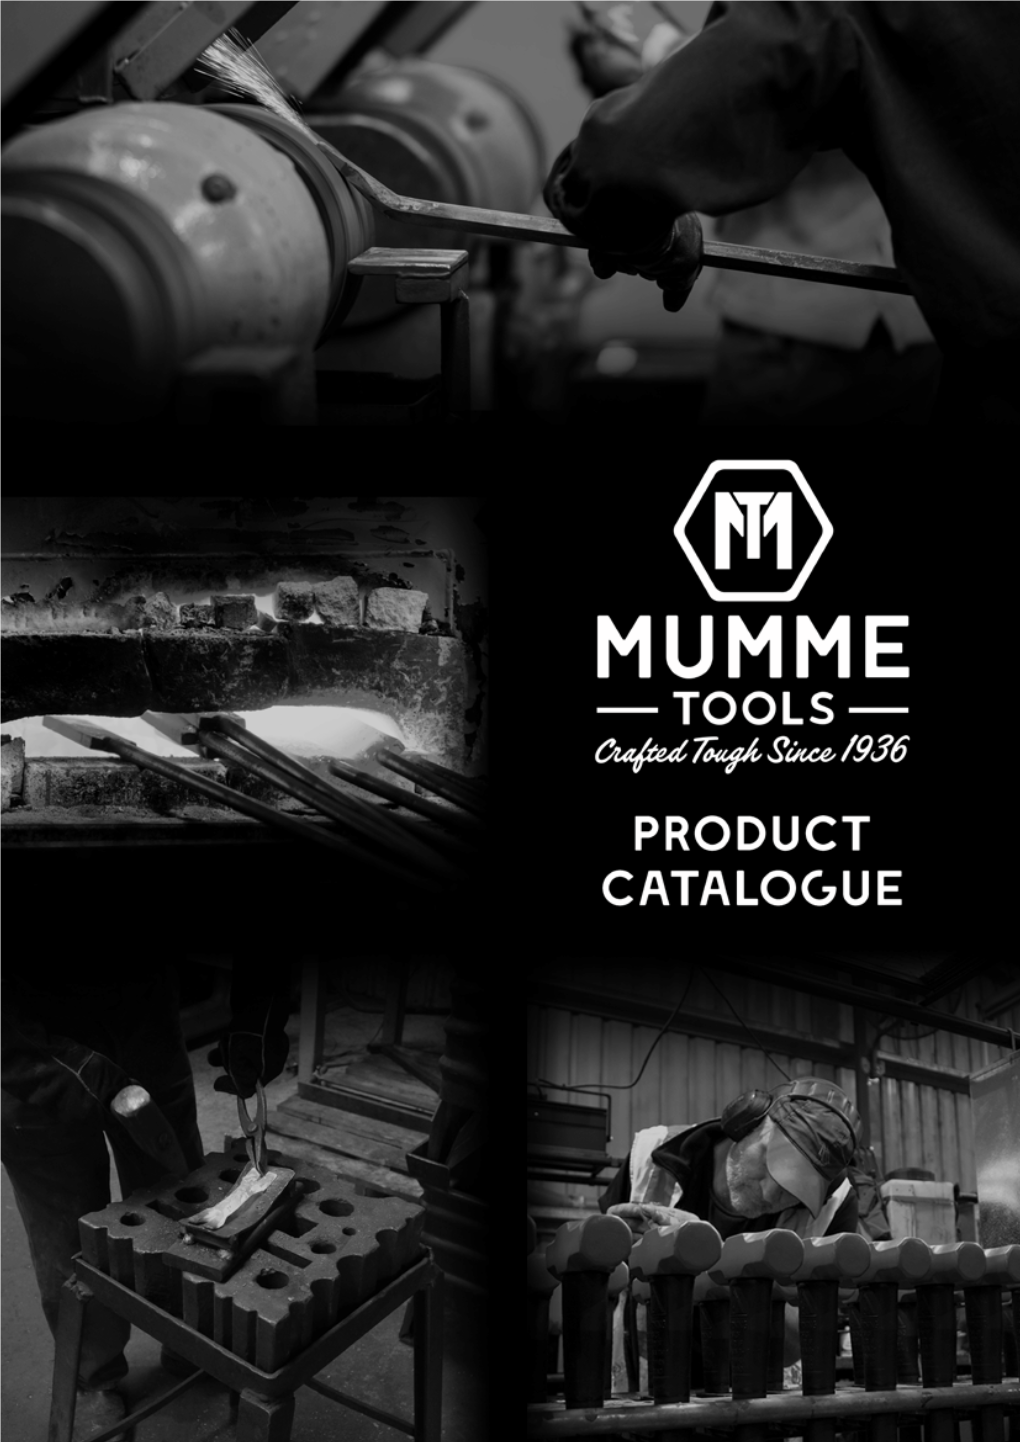 Mumme Tools Started in Ground Points for Easier Tinning Forged from Pure Electrolytic Copper Used for Solderingsheet Metal Andmetal Products History - 3